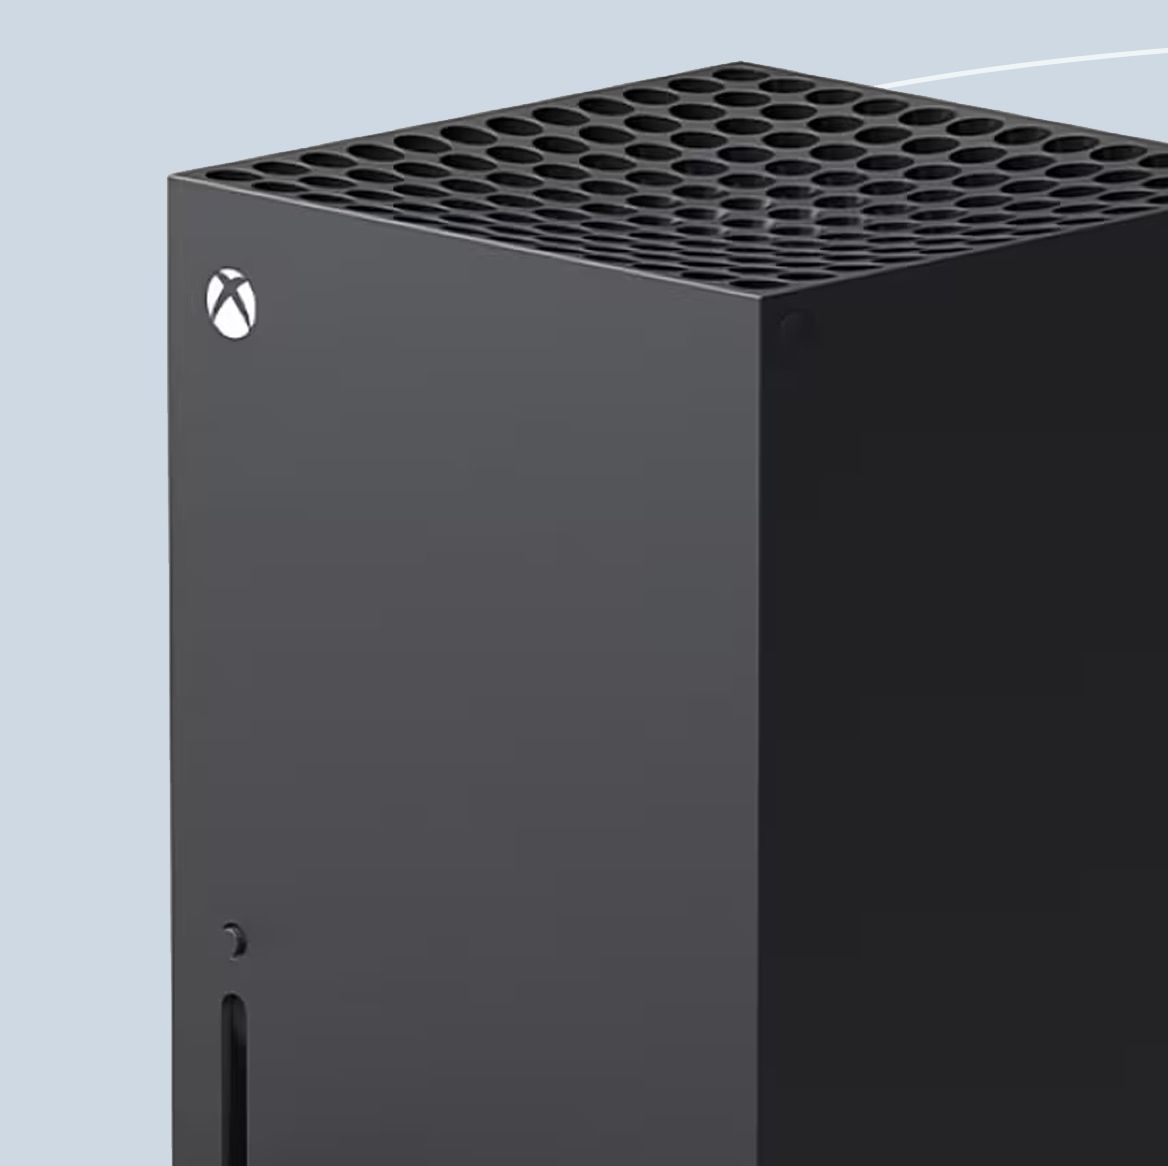 Score an Xbox Series S for Just £149.99 This Prime Day - IGN